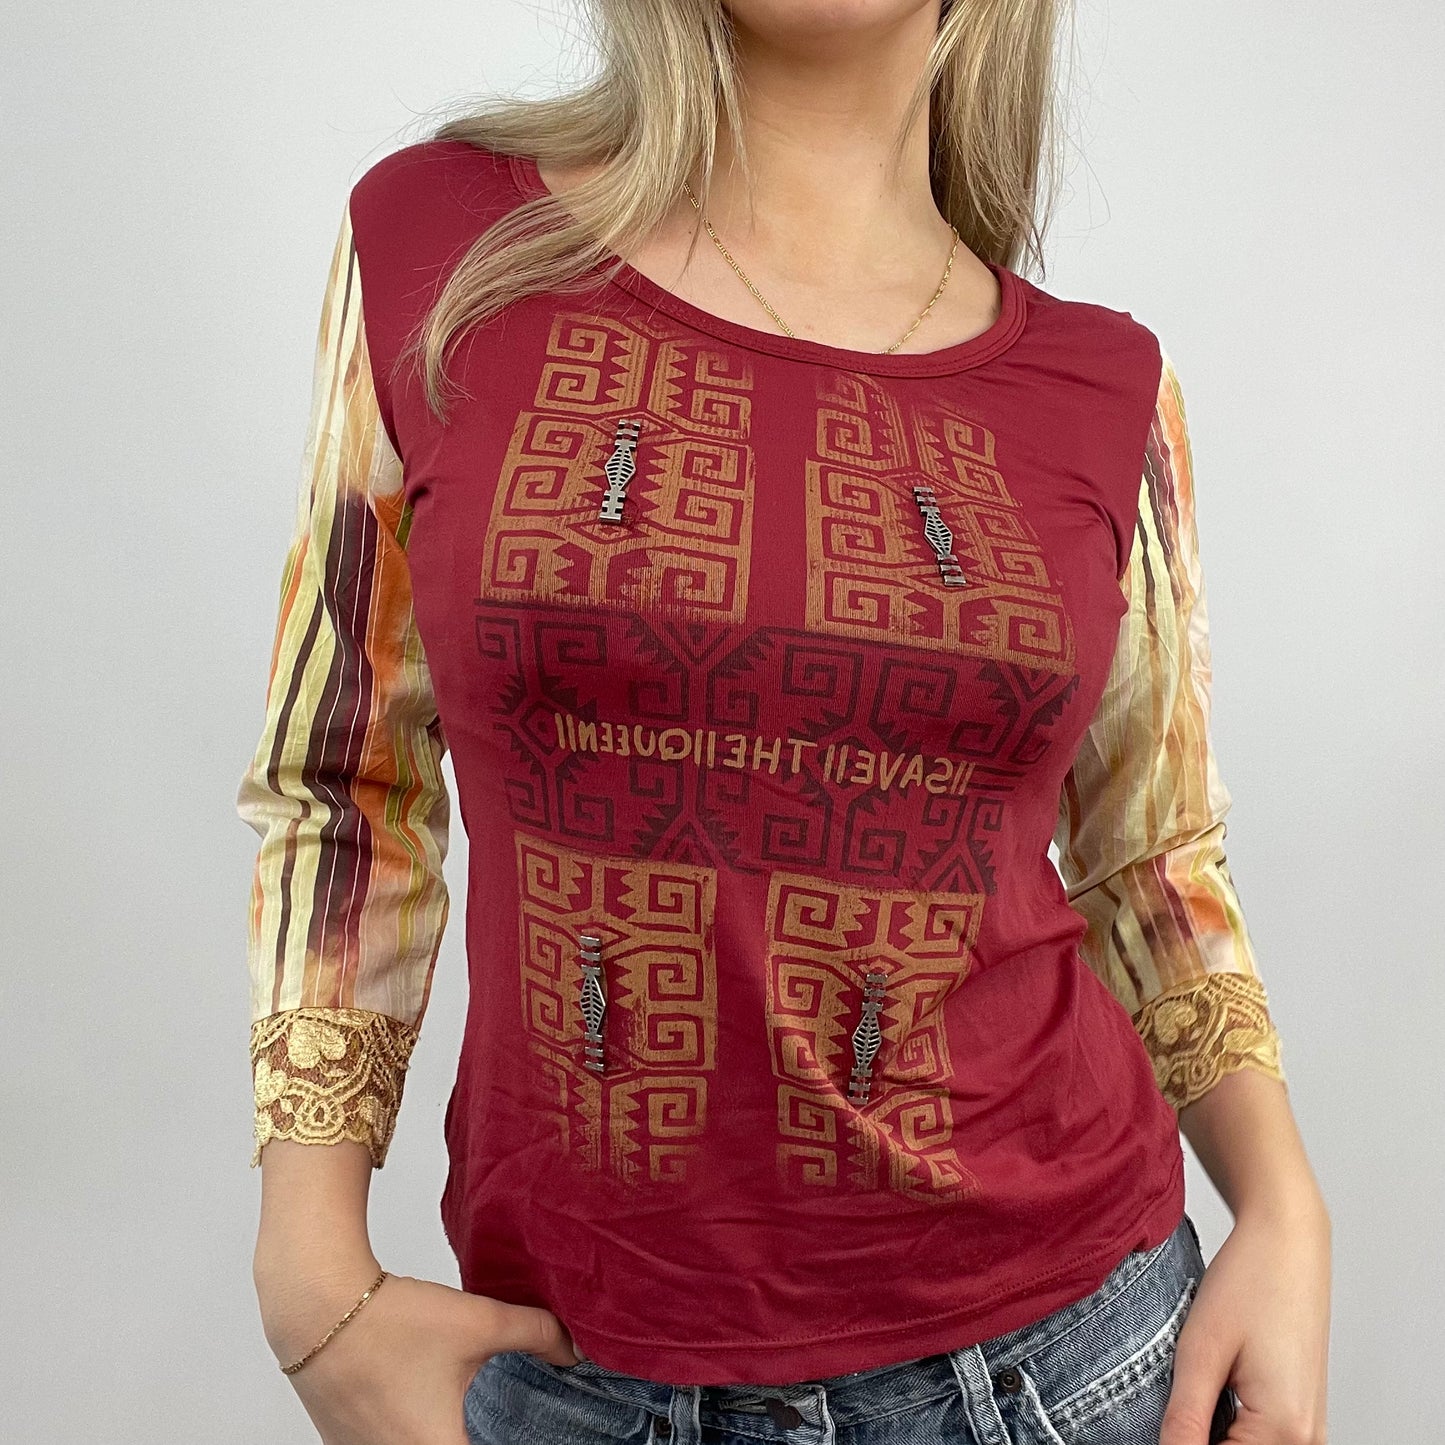 BEST PICKS | small red and yellow save the queen graphic 3/4 length sleeve top